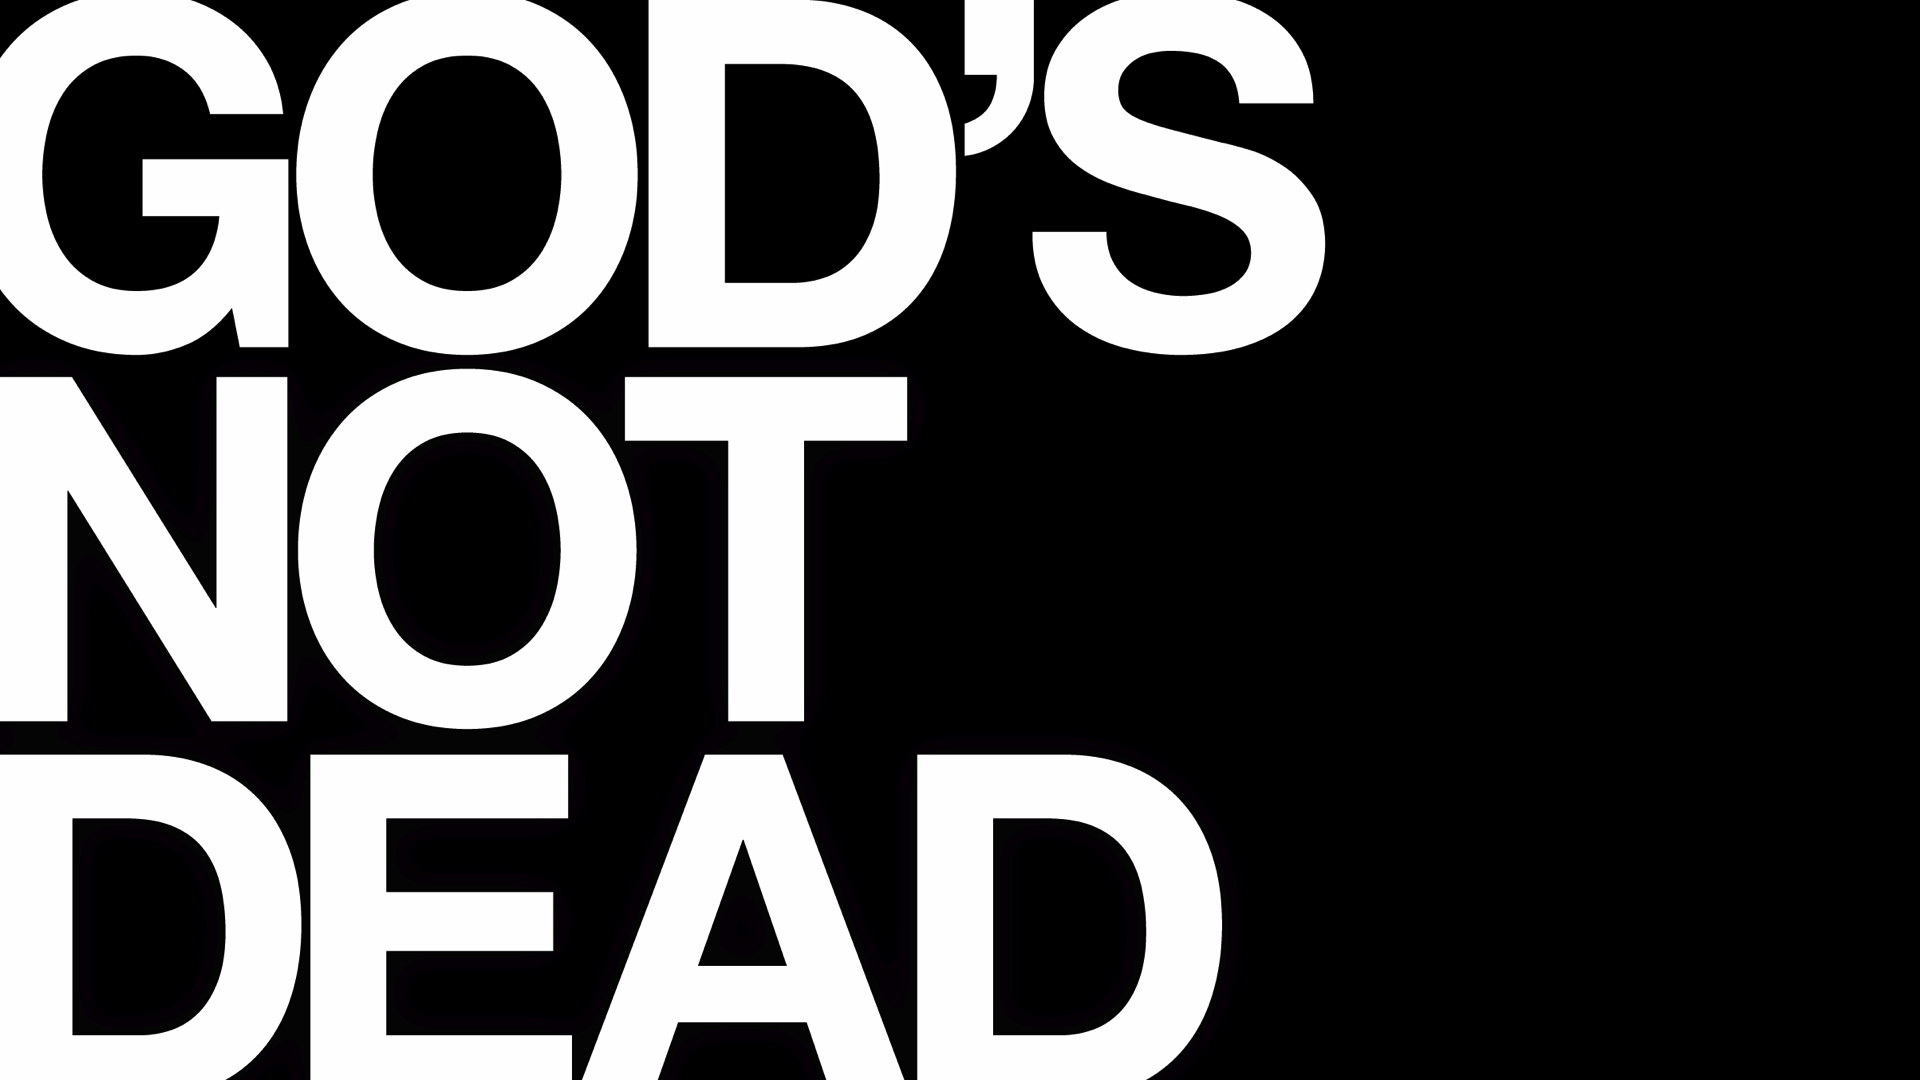 gods not dead 3 free movie download